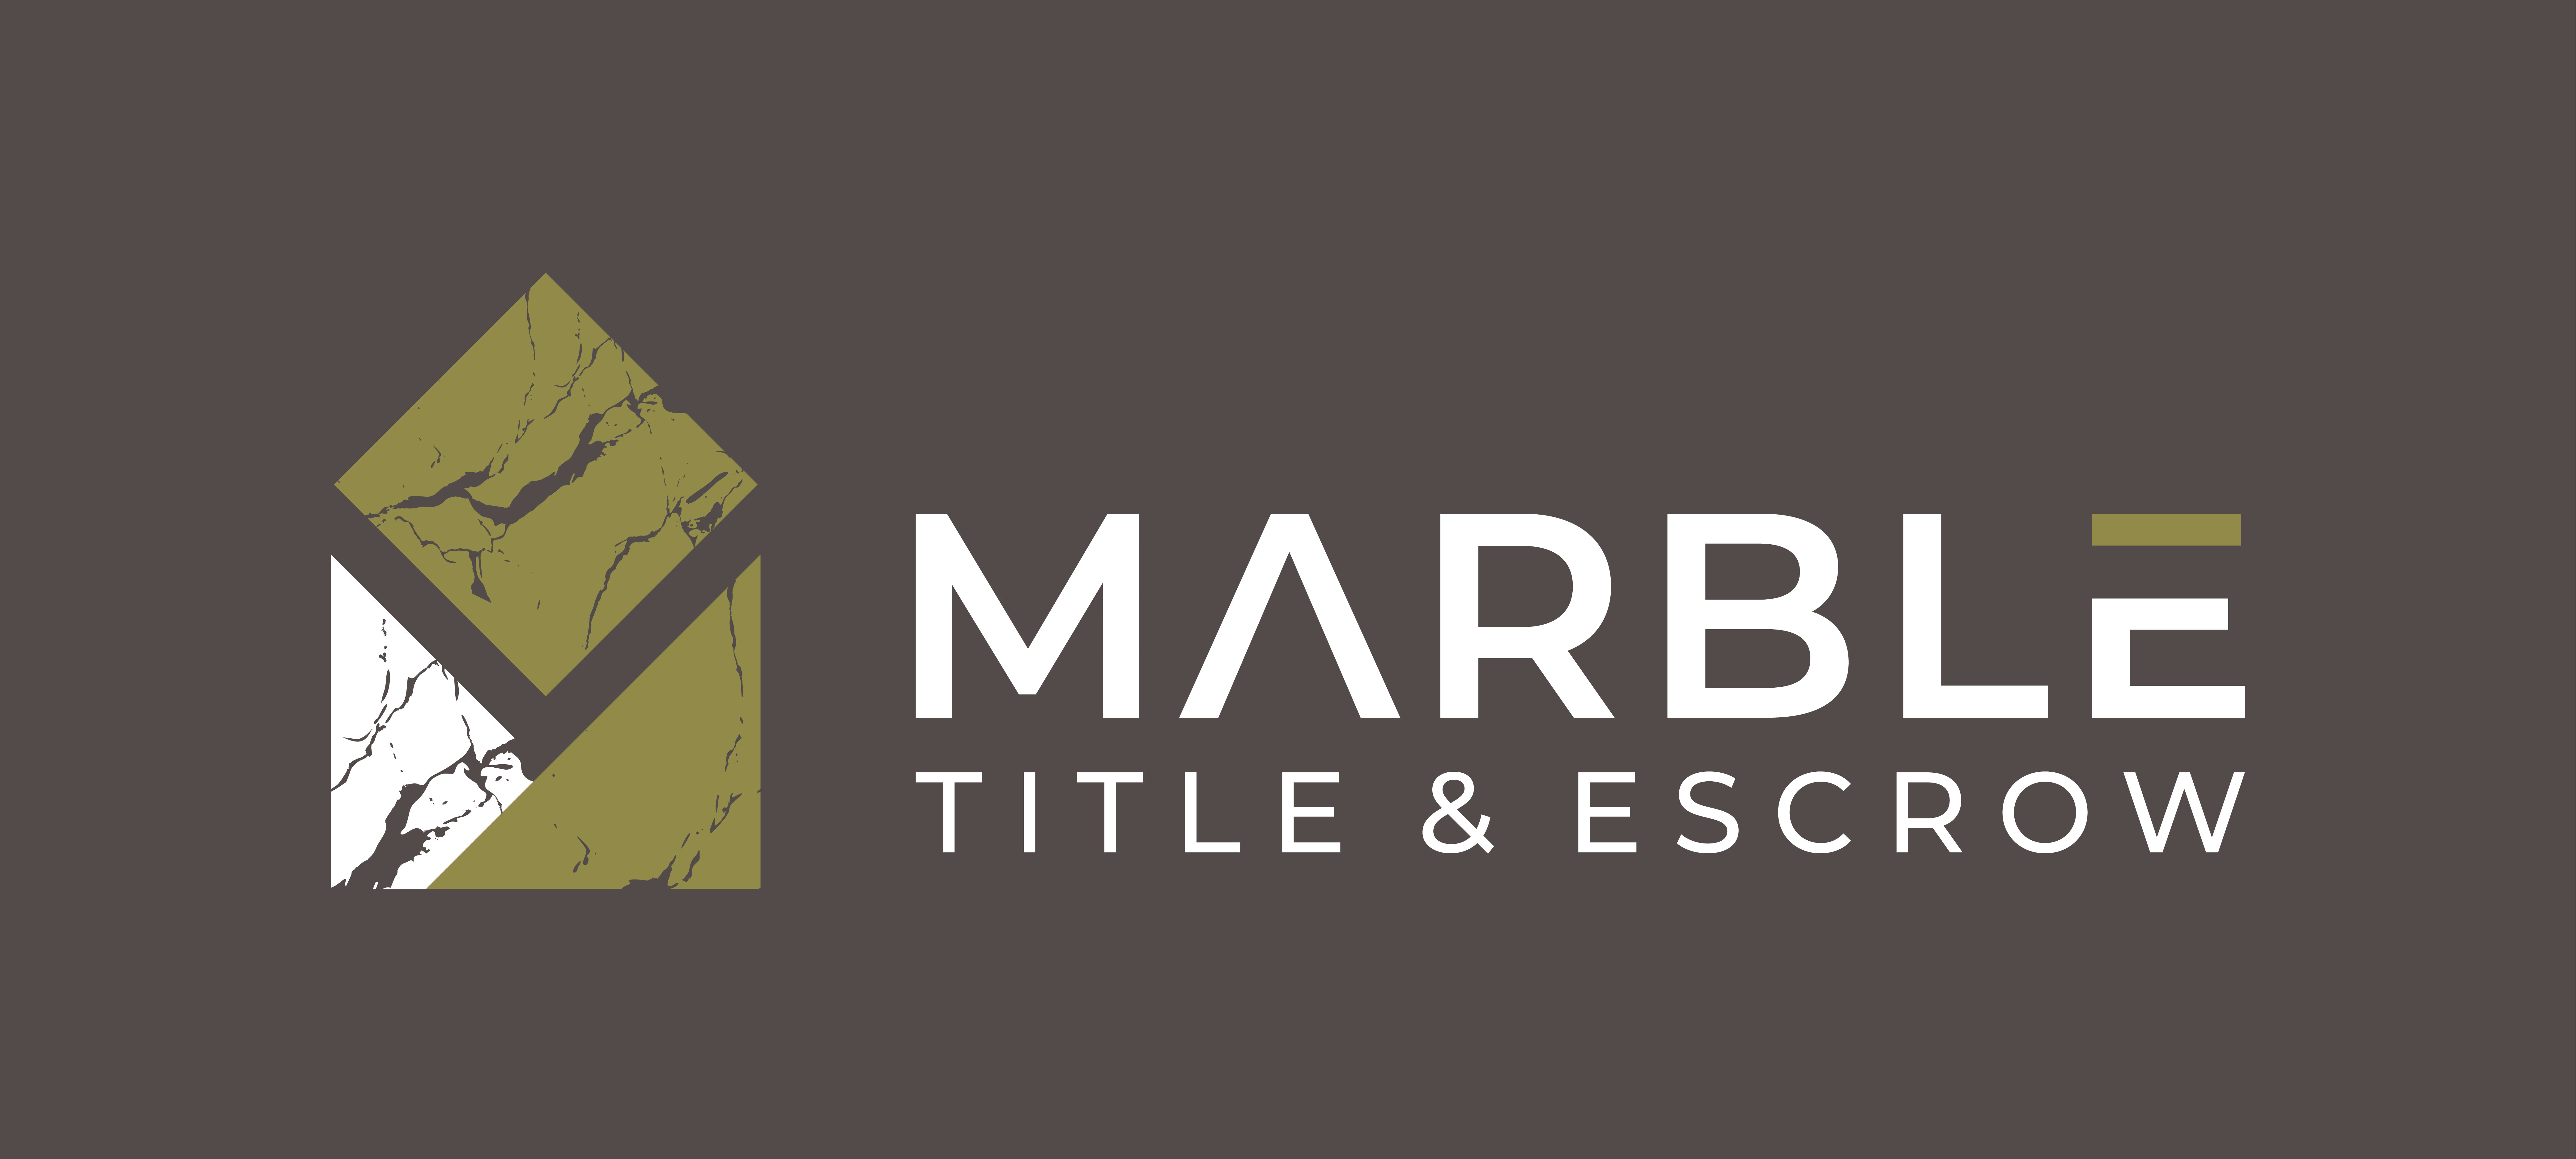 Marble Title & Escrow